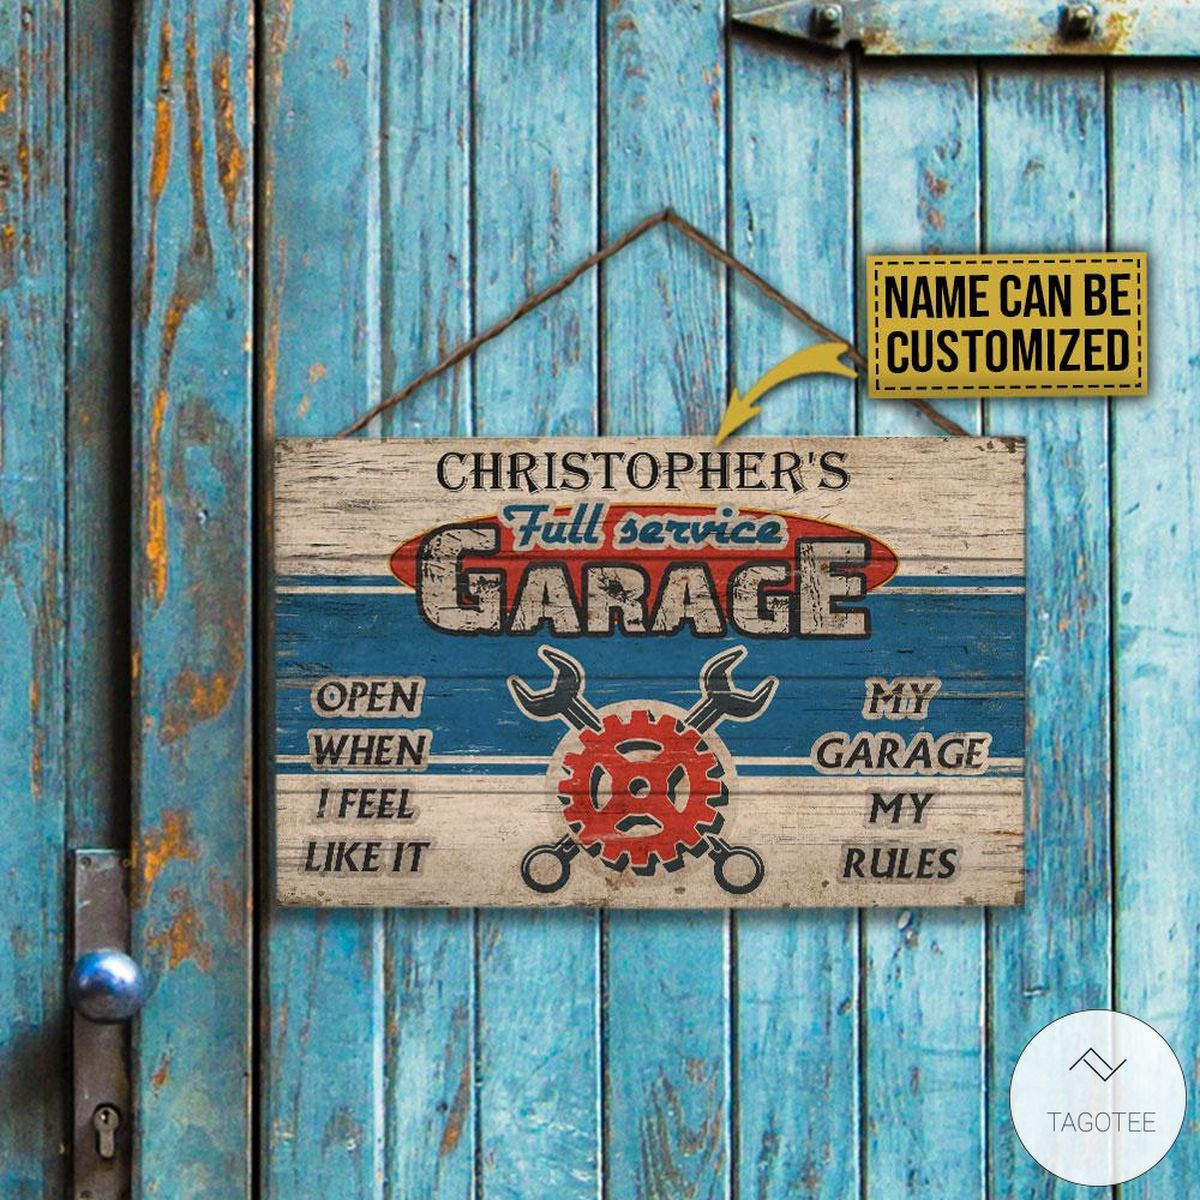 Personalized-Garage-Open-When-I-Feel-Like-It-My-Garage-My-Rules-Rectangle-Wood-Sign